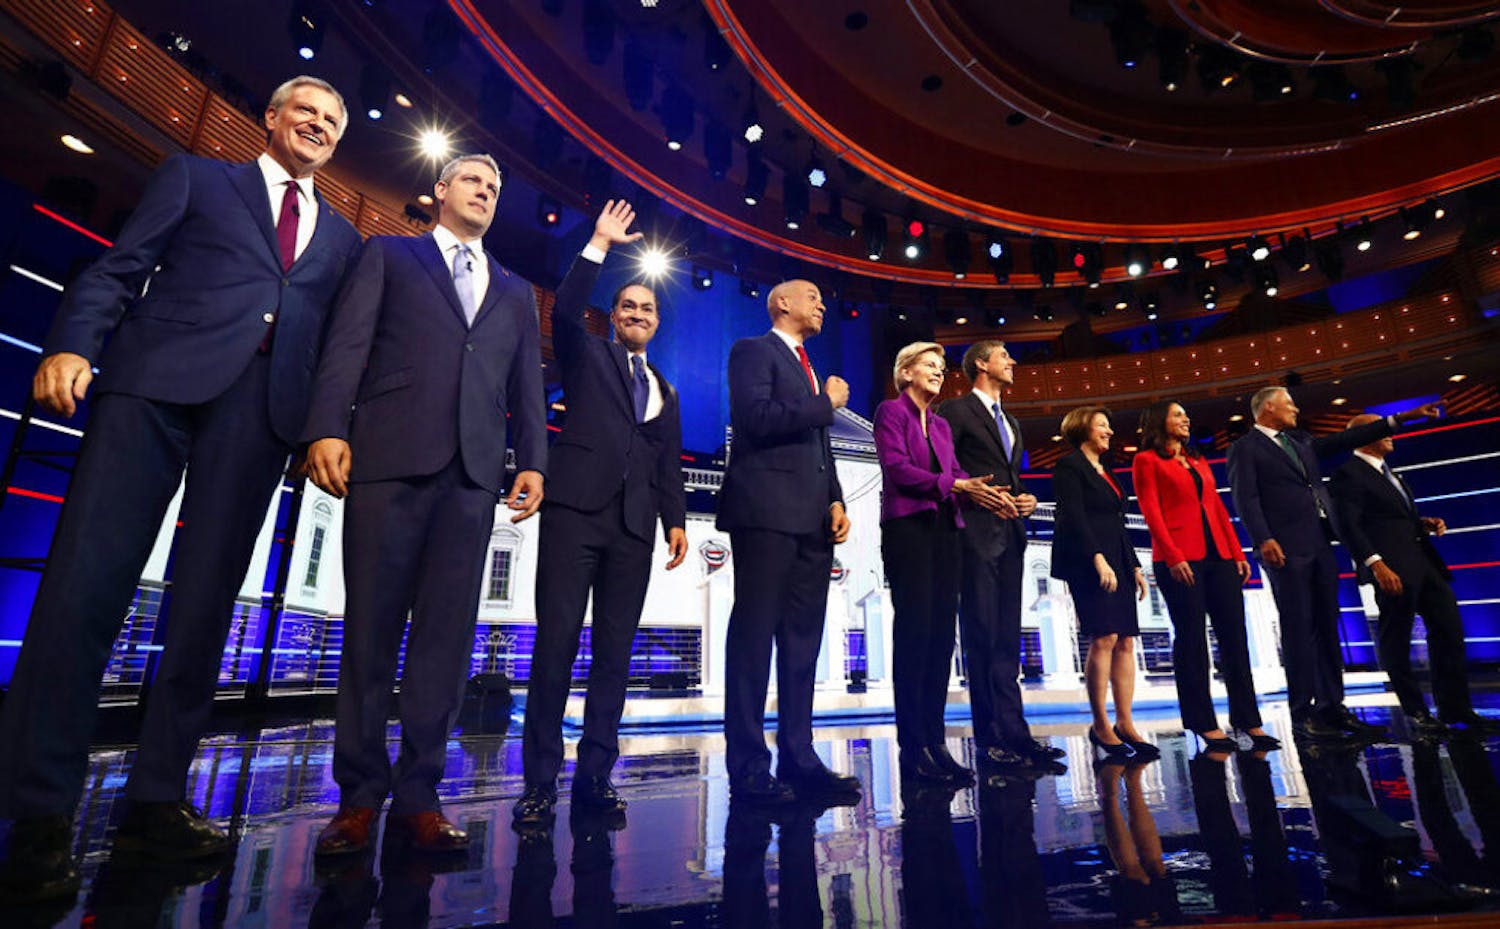 From left, New York City Mayor Bill de Blasio, Rep. Tim Ryan, D-Ohio, former Housing and Urban Development Secretary Julian Castro, Sen. Cory Booker, D-N.J., Sen. Elizabeth Warren, D-Mass., former Texas Rep. Beto O’Rourke, Sen. Amy Klobuchar, D-Minn., Rep. Tulsi Gabbard, D-Hawaii, Washington Gov. Jay Inslee, and former Maryland Rep. John Delaney pose for a photo on stage before the start of a Democratic primary debate hosted by NBC News at the Adrienne Arsht Center for the Performing Arts, Wednesday, June 26, 2019, in Miami.